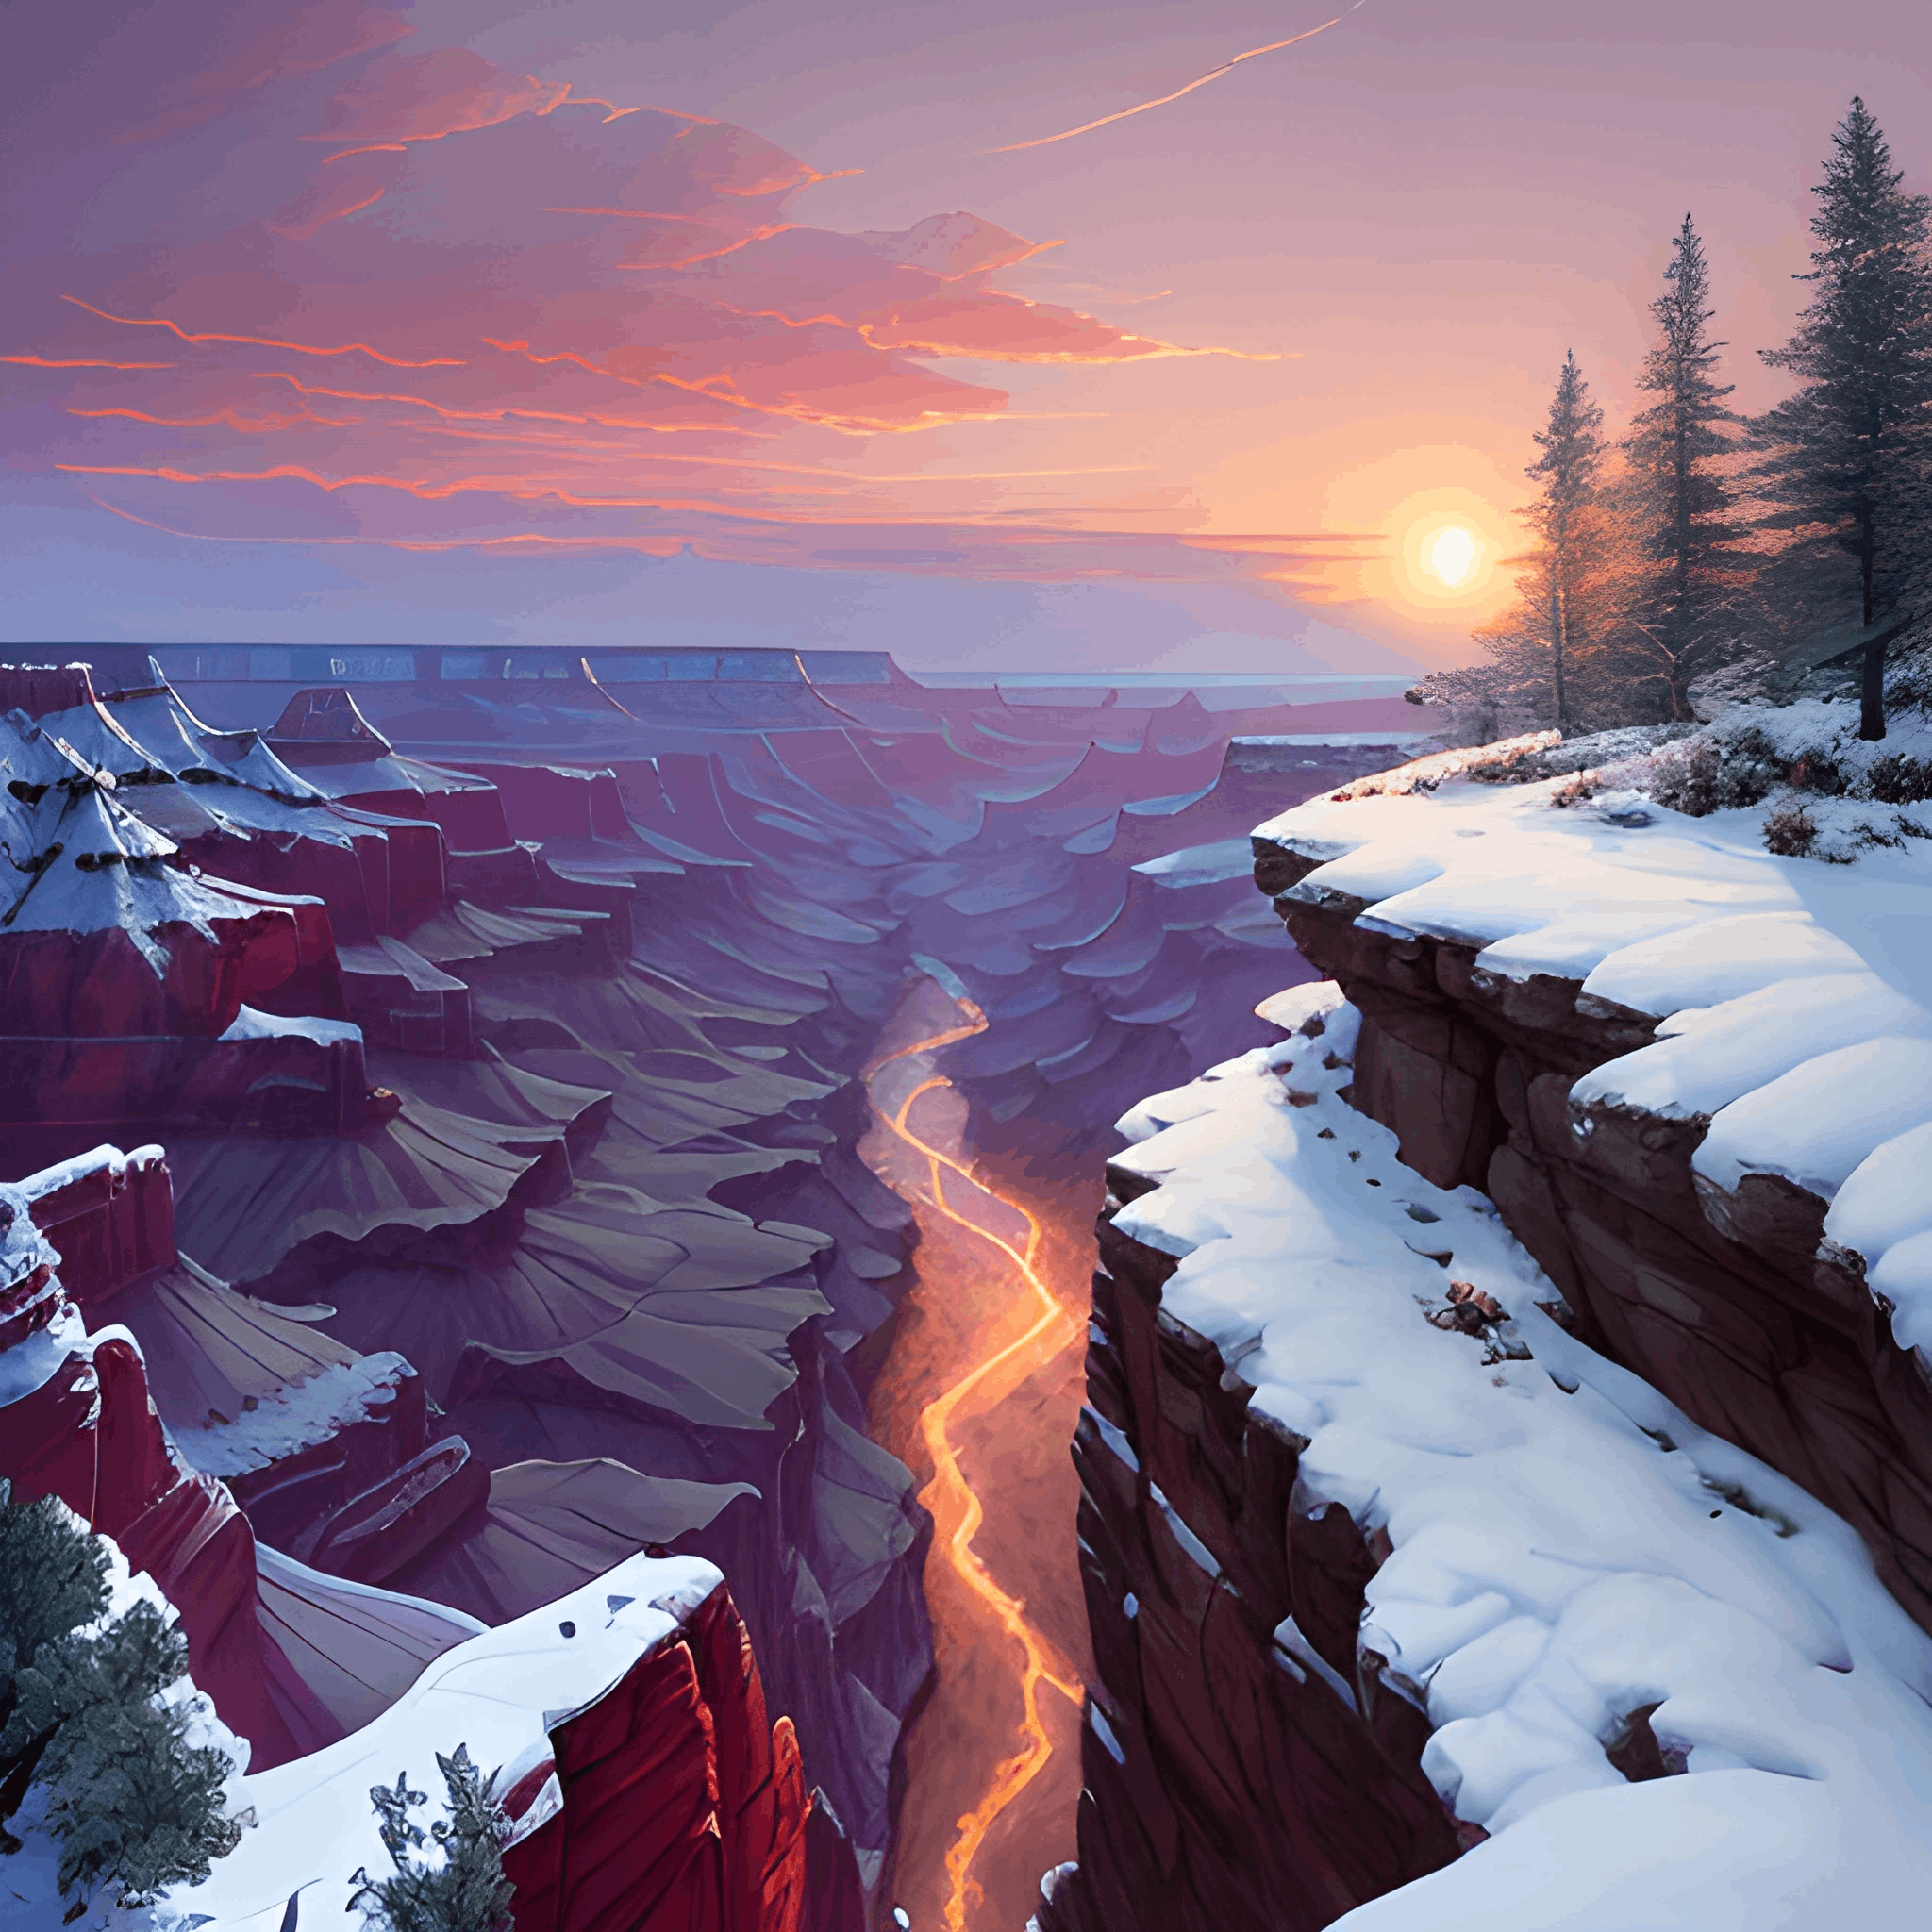 snowy landscape of a canyon with a river running through it